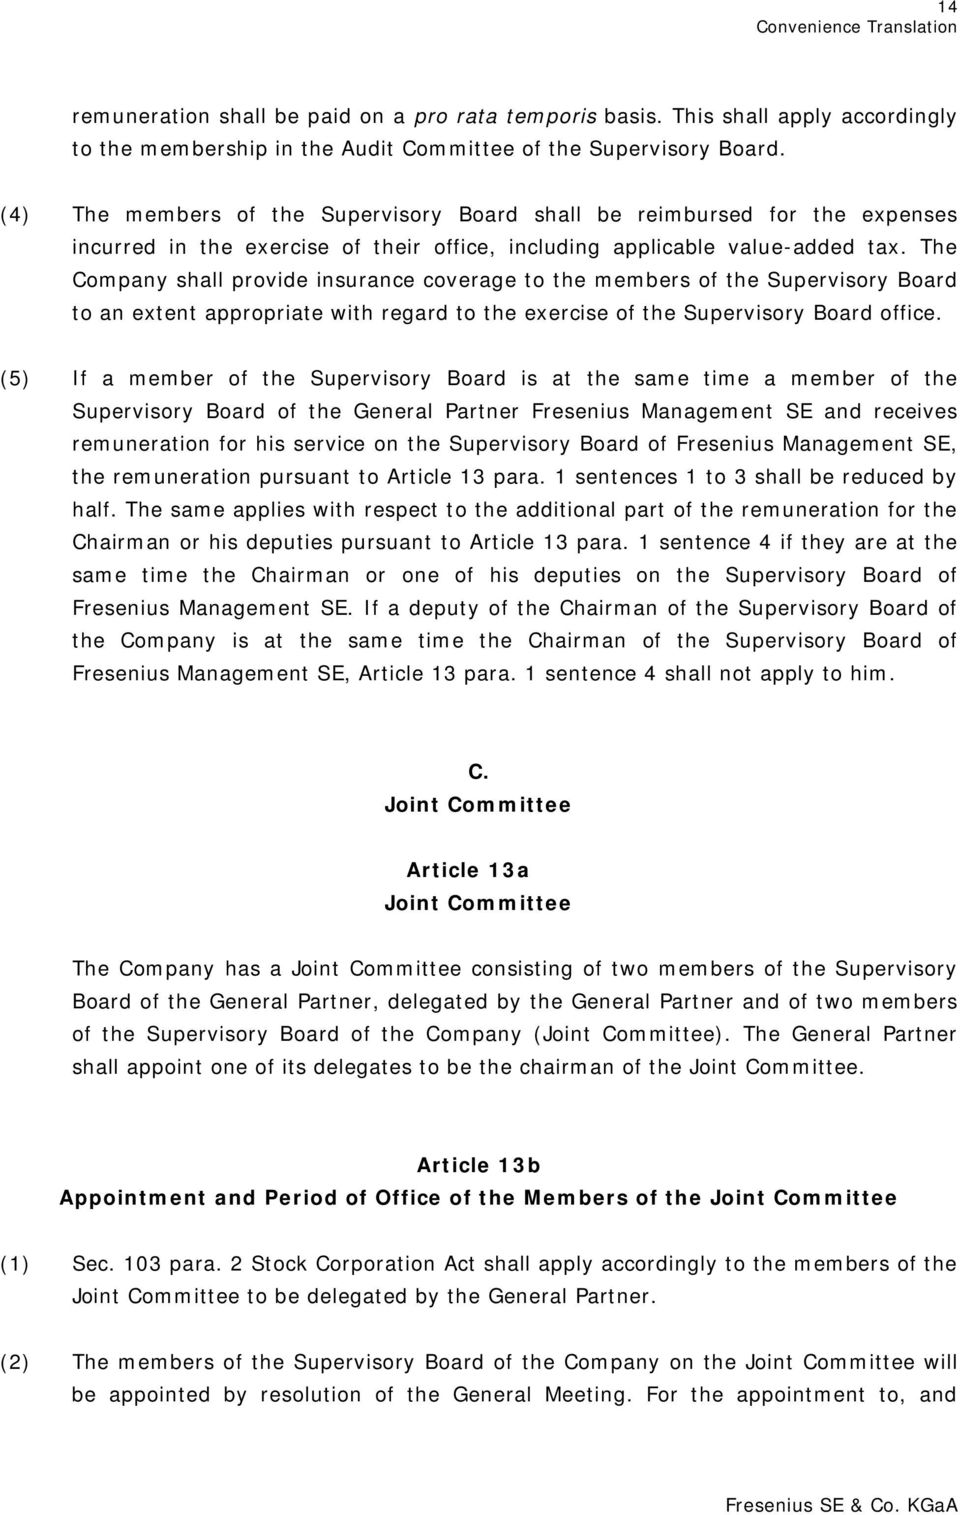 The Company shall provide insurance coverage to the members of the Supervisory Board to an extent appropriate with regard to the exercise of the Supervisory Board office.